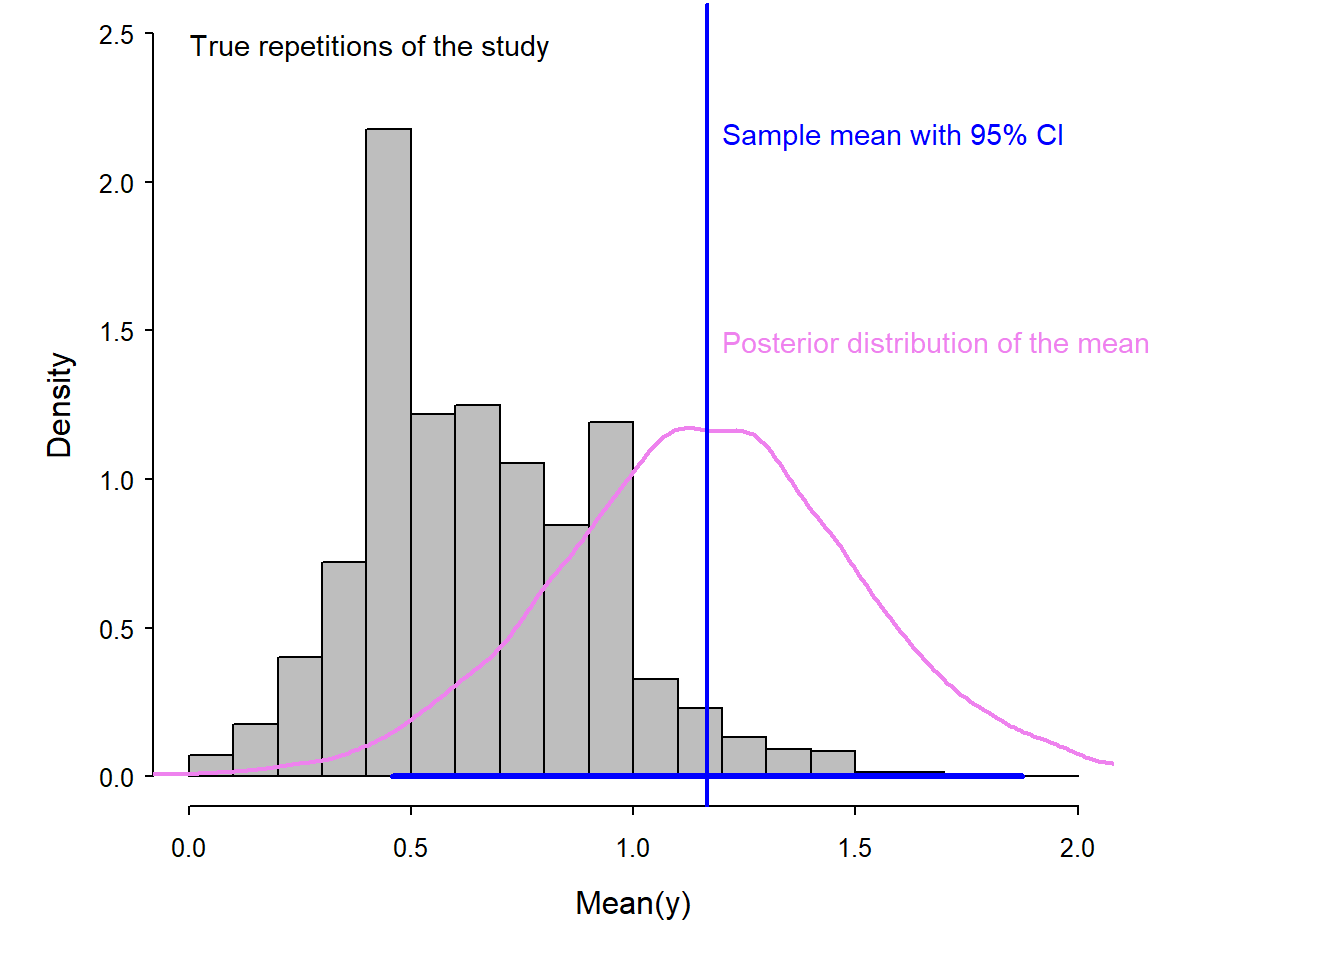 Histogram of means of repeated samples from the true populations. The scatter of these means visualize the true uncertainty of the mean in this example. The blue vertical line indicates the mean of the original sample. The blue segment shows the 95% confidence interval (obtained by fequensist methods) and the violet line shows the posterior distribution of the mean (obtained by Bayesian methods). For both solutions, we assumed a Normal distribution for the data that is different from the true mechanism that generated the data (which was an overdispersed Poisson model. The star indicates the true mean.